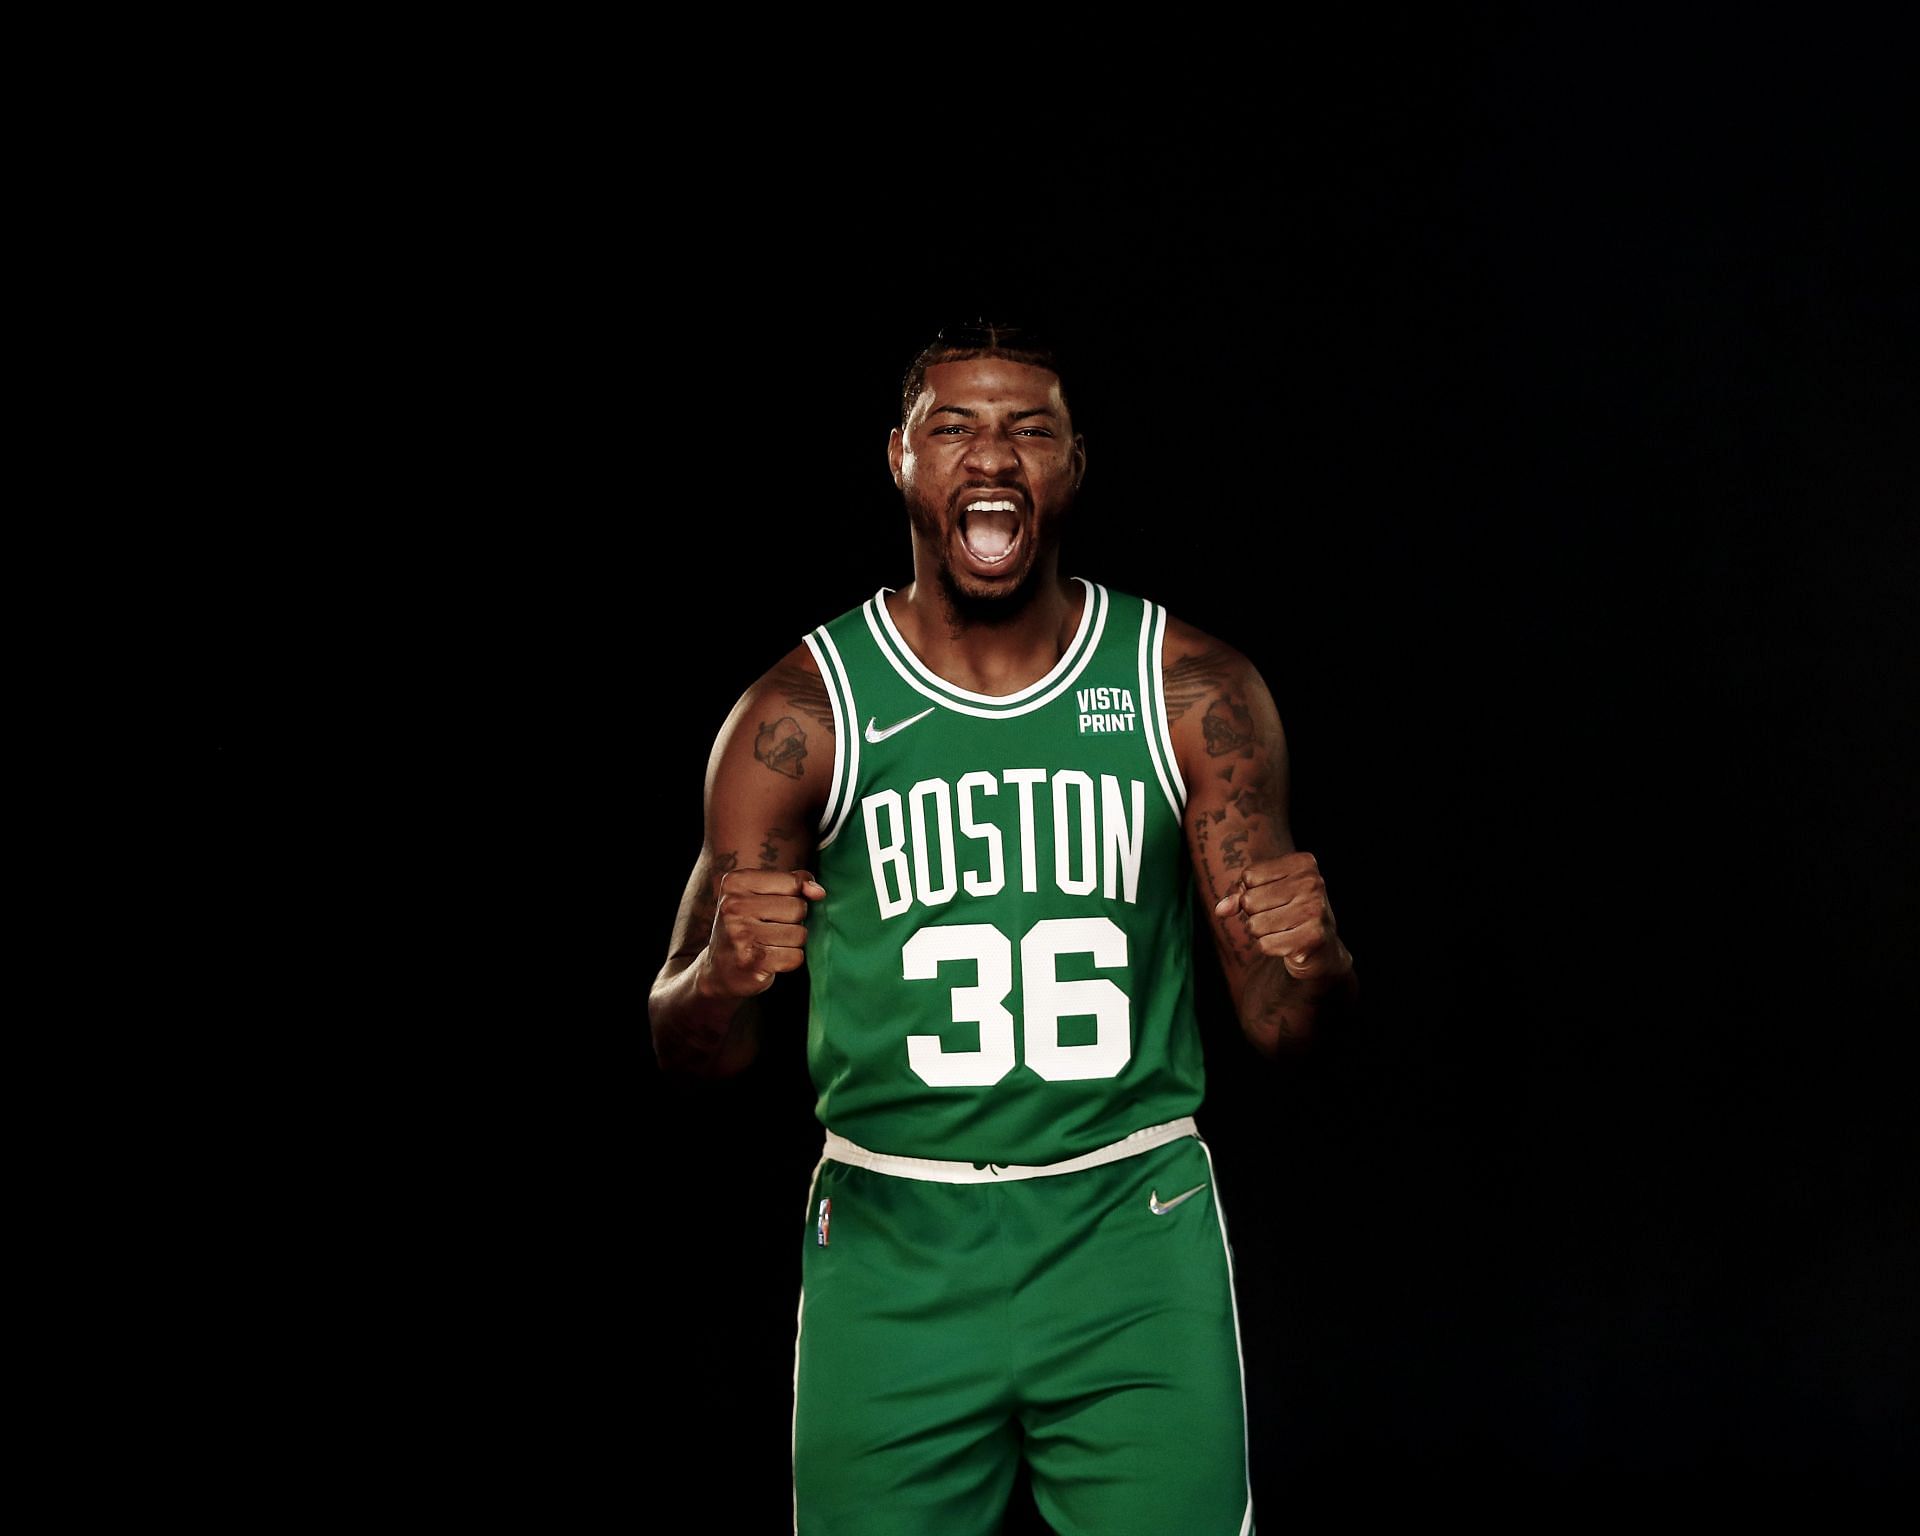 &lt;a href=&#039;https://www.sportskeeda.com/basketball/marcus-smart&#039; target=&#039;_blank&#039; rel=&#039;noopener noreferrer&#039;&gt;Marcus Smart&lt;/a&gt; will be running the show for the Boston Celtics offense